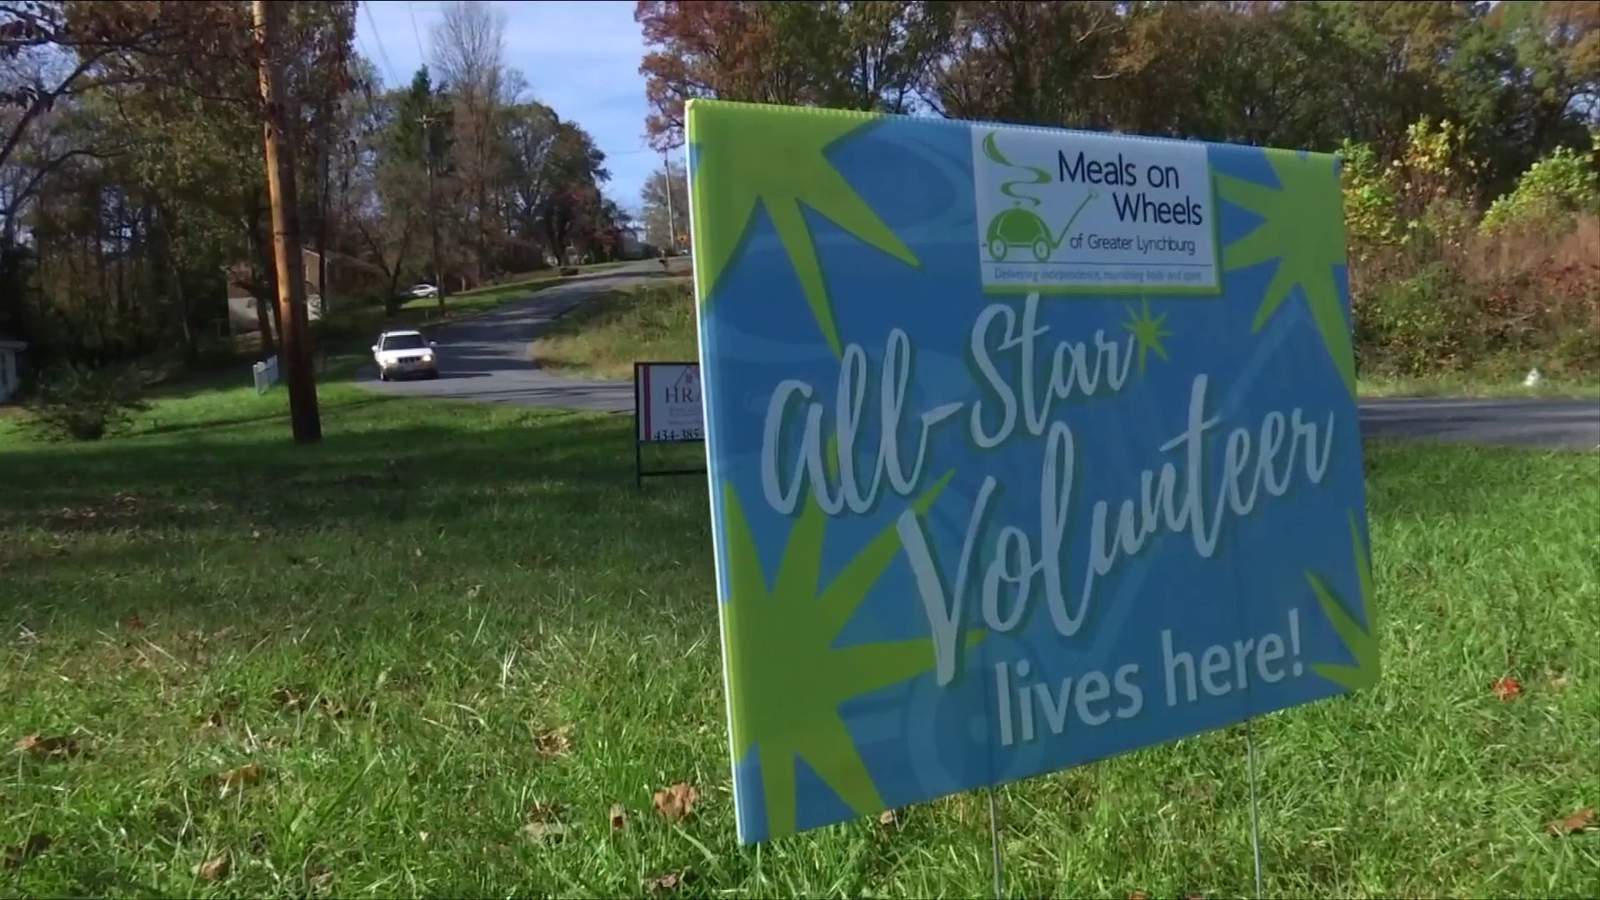 Meals on Wheels of Greater Lynchburg shows gratitude to pandemic volunteers